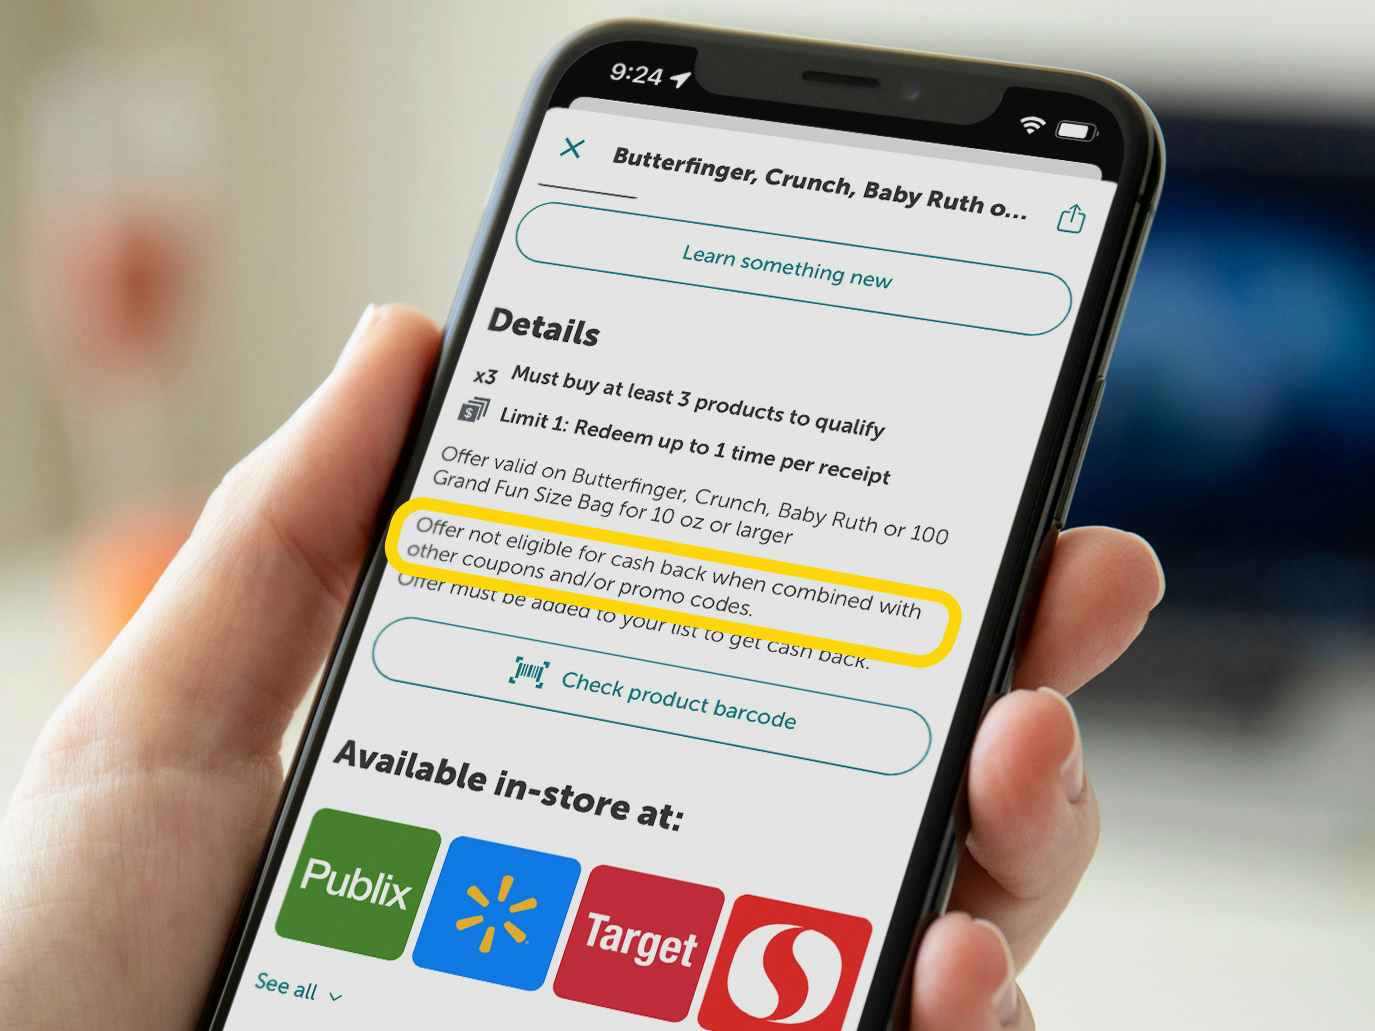 A close up on an offer in the ibotta app displayed on a cellphone with a yellow box around text that reads, "Offer not eligible for cash back when combined with other coupons and/or promo codes